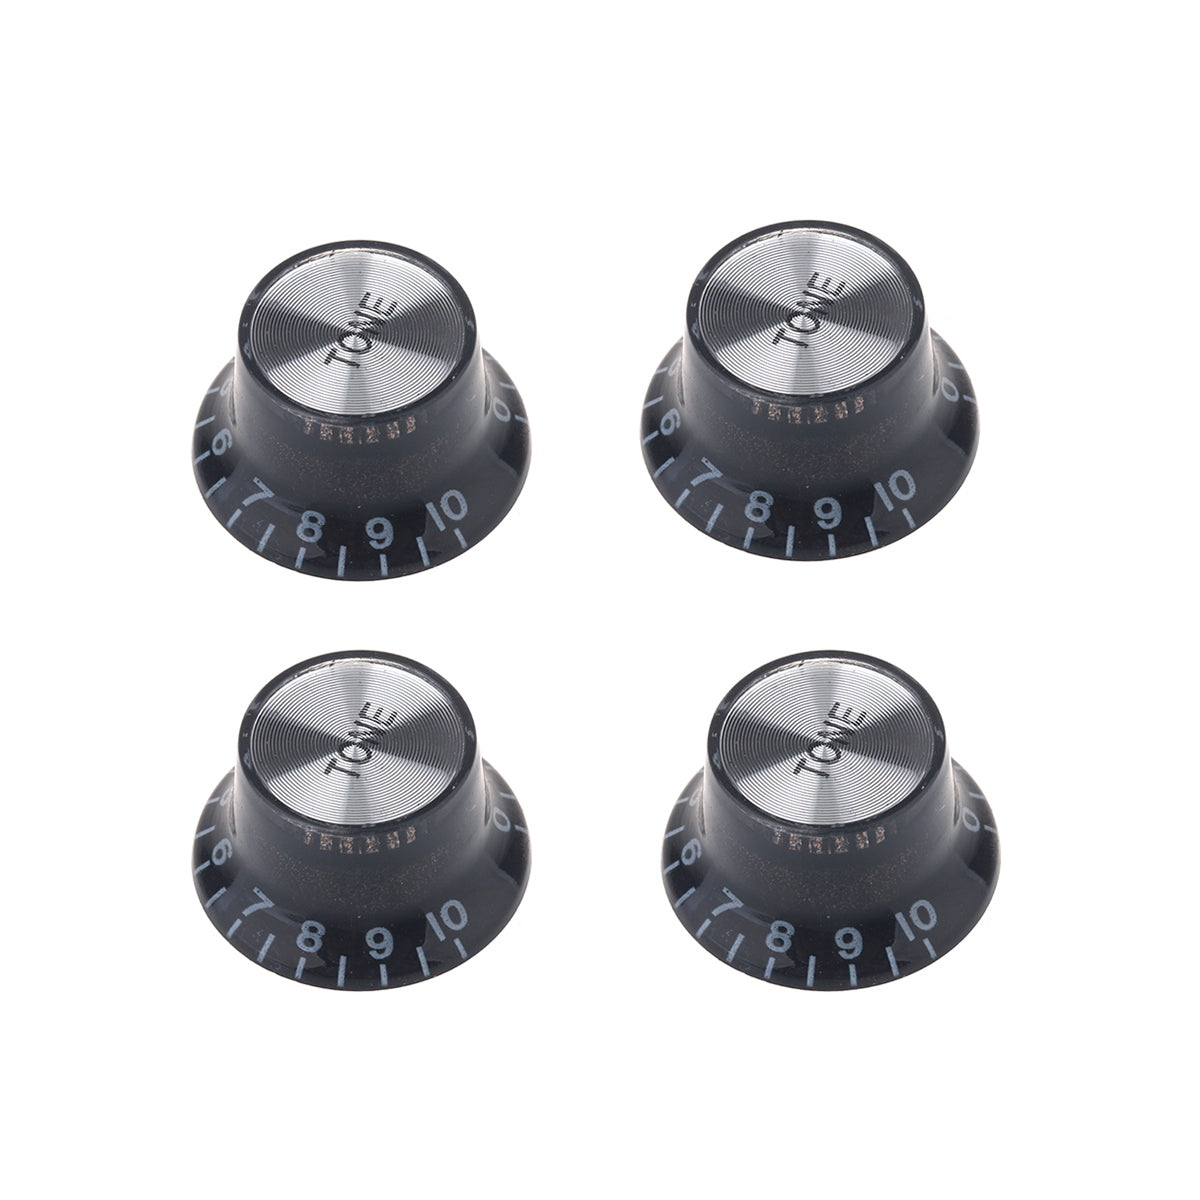 Musiclily Metric 6mm LP Style Guitar Speed Tone Control Knobs,Black ( 4 Pieces)